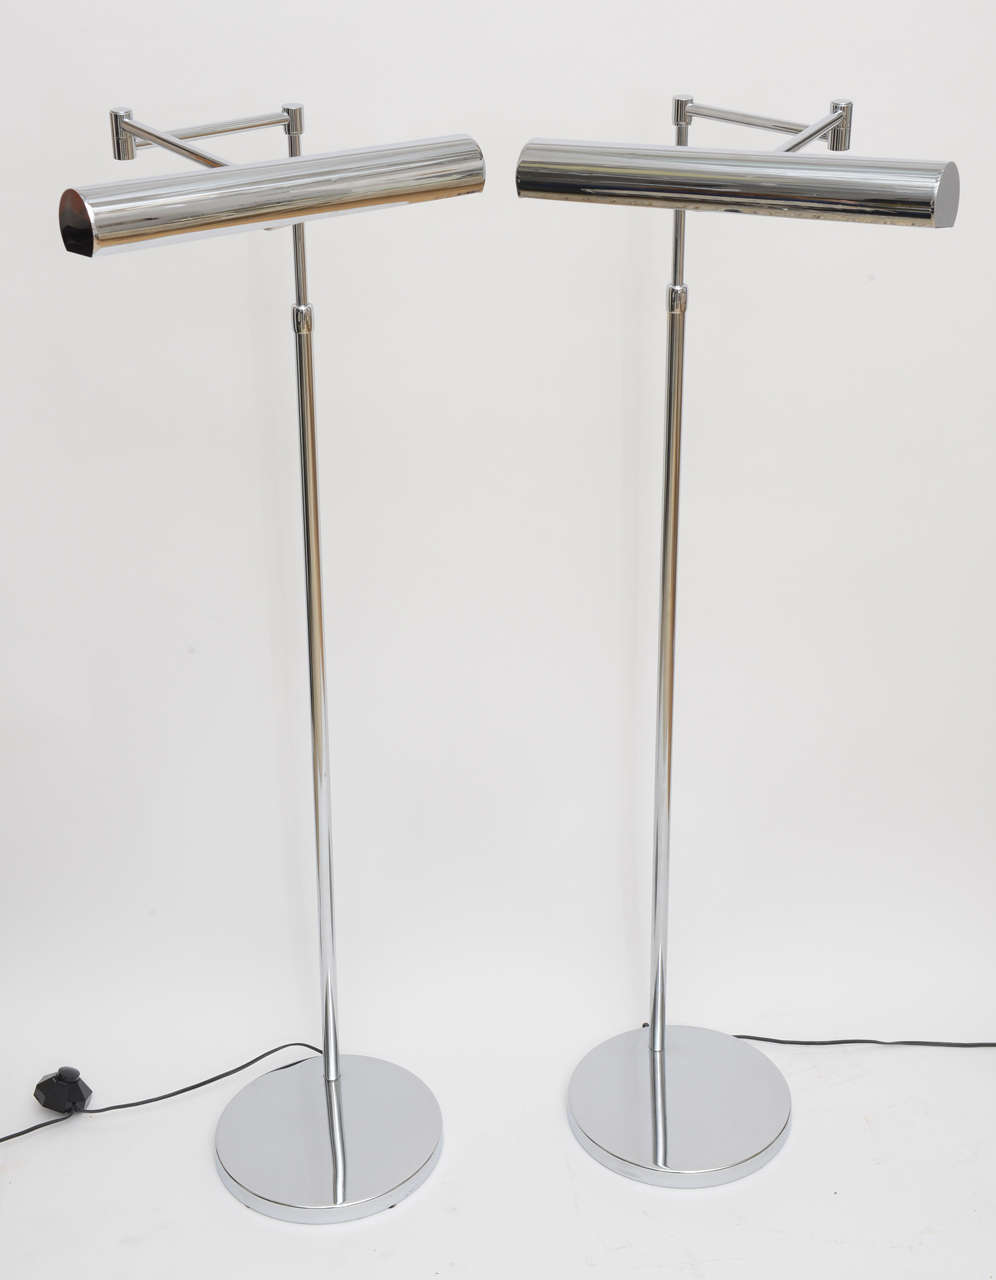 Mid-Century Modern pair of Walter Von Nessen chrome floor lamps with swing arms and articulated cylindrical heads.

Please feel free to contact us directly for a shipping quote or any additional information by clicking 